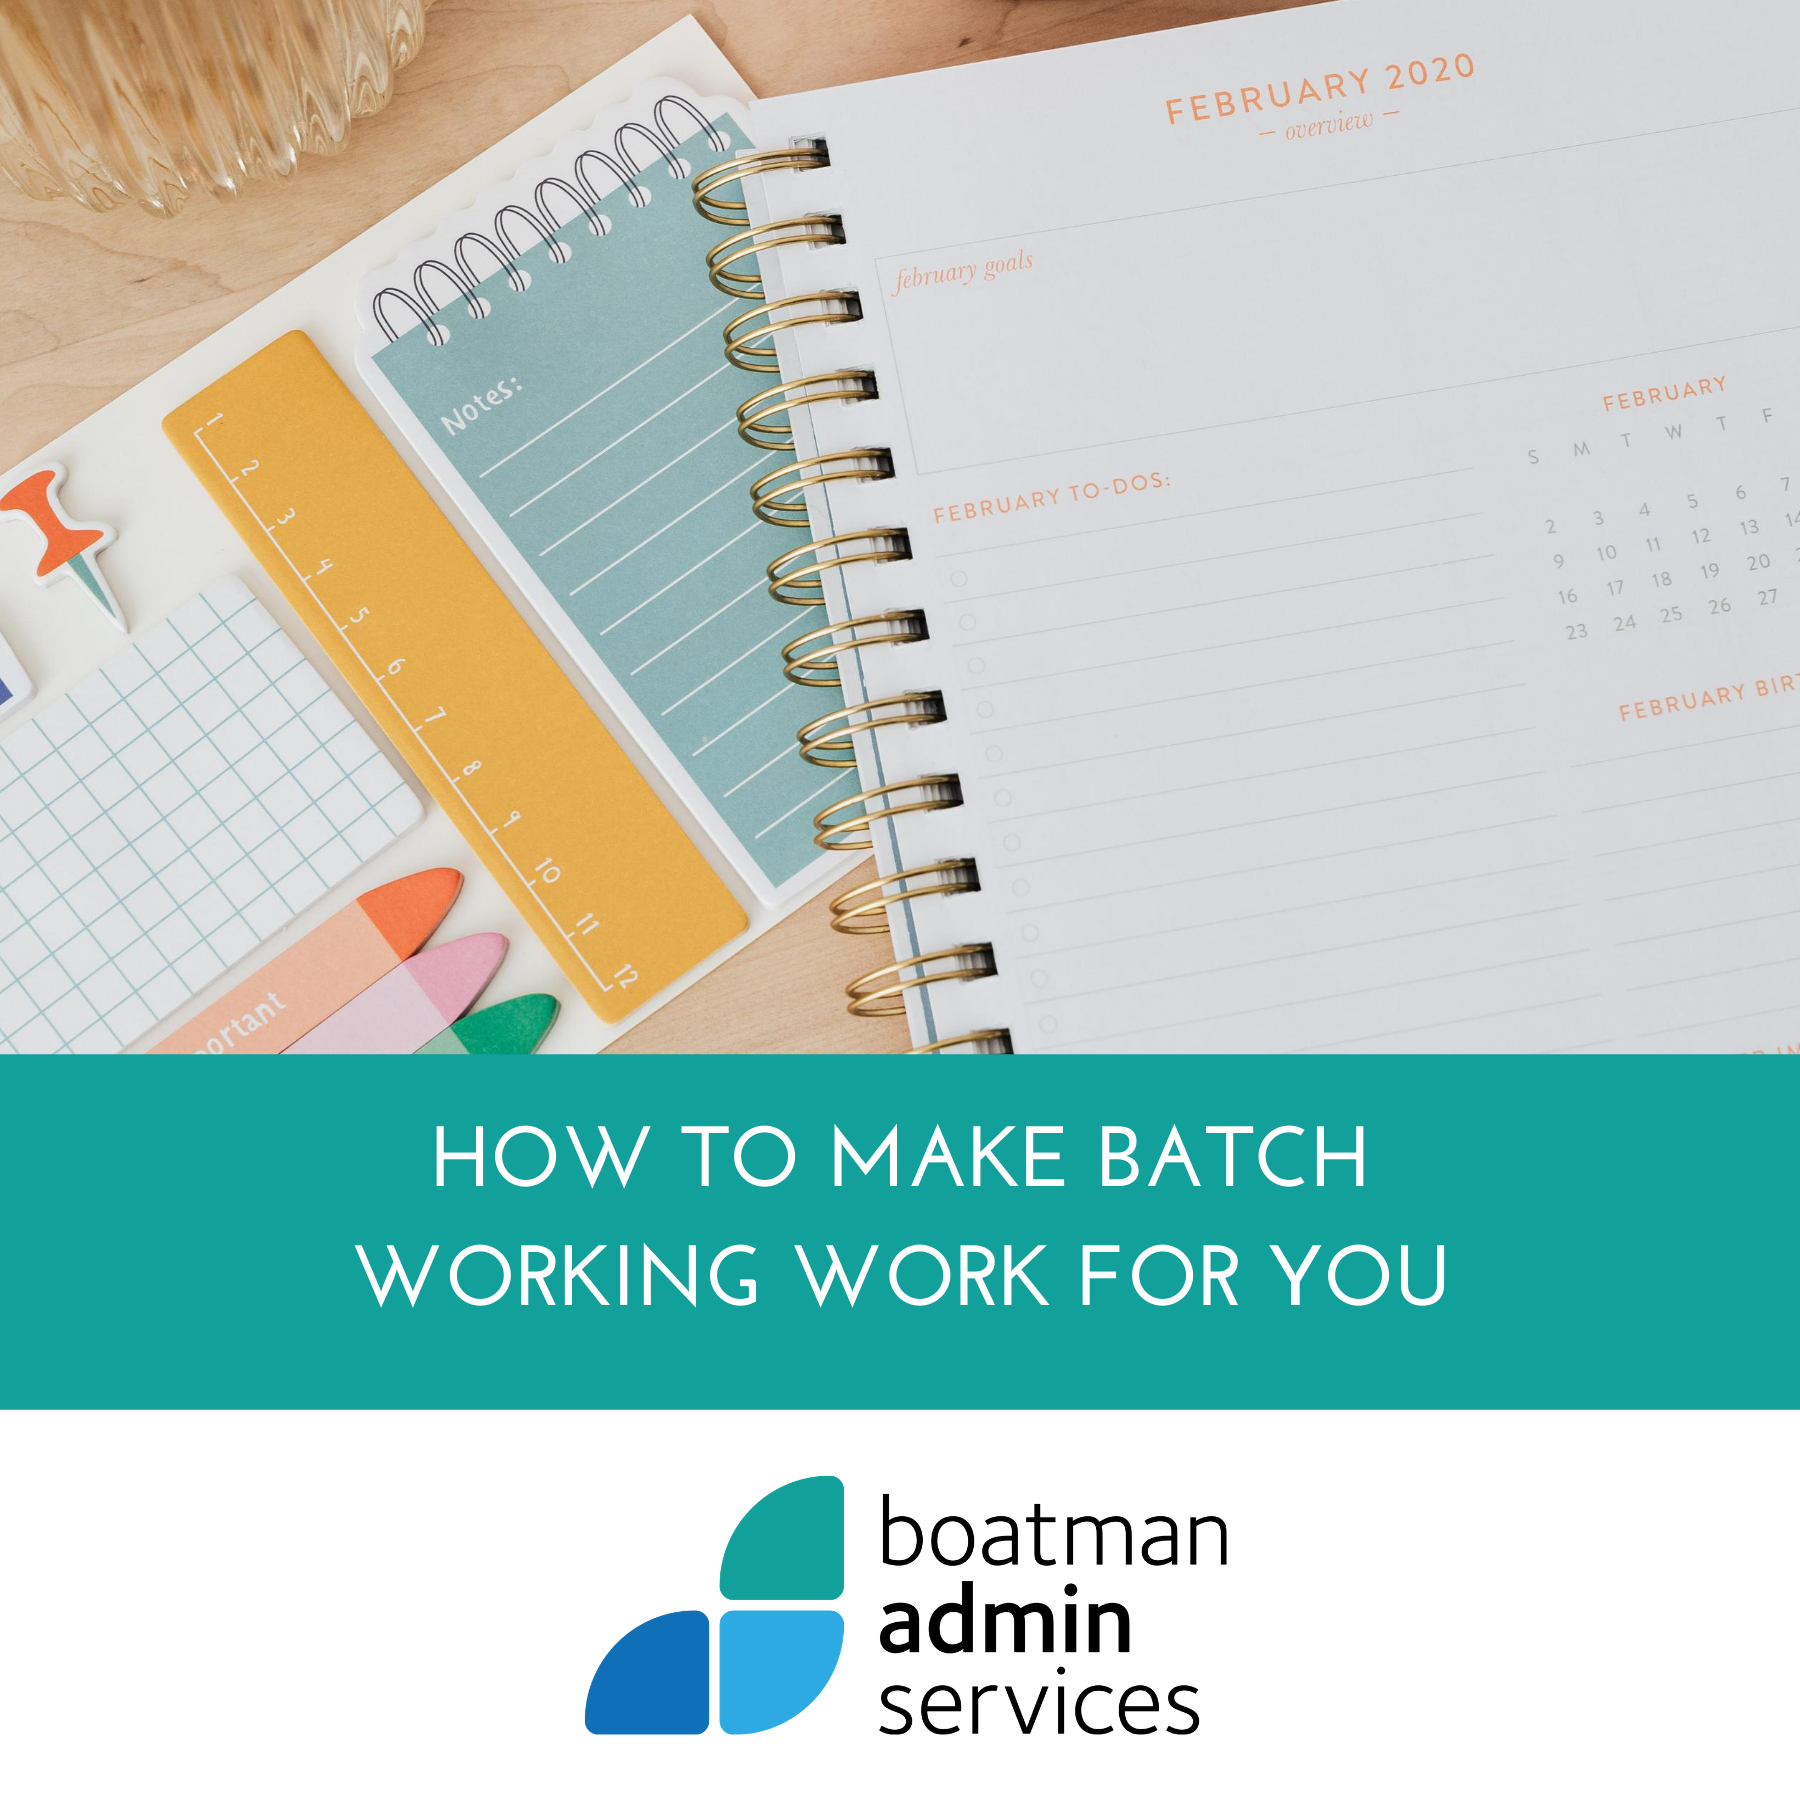 How to make Batch Working work for you